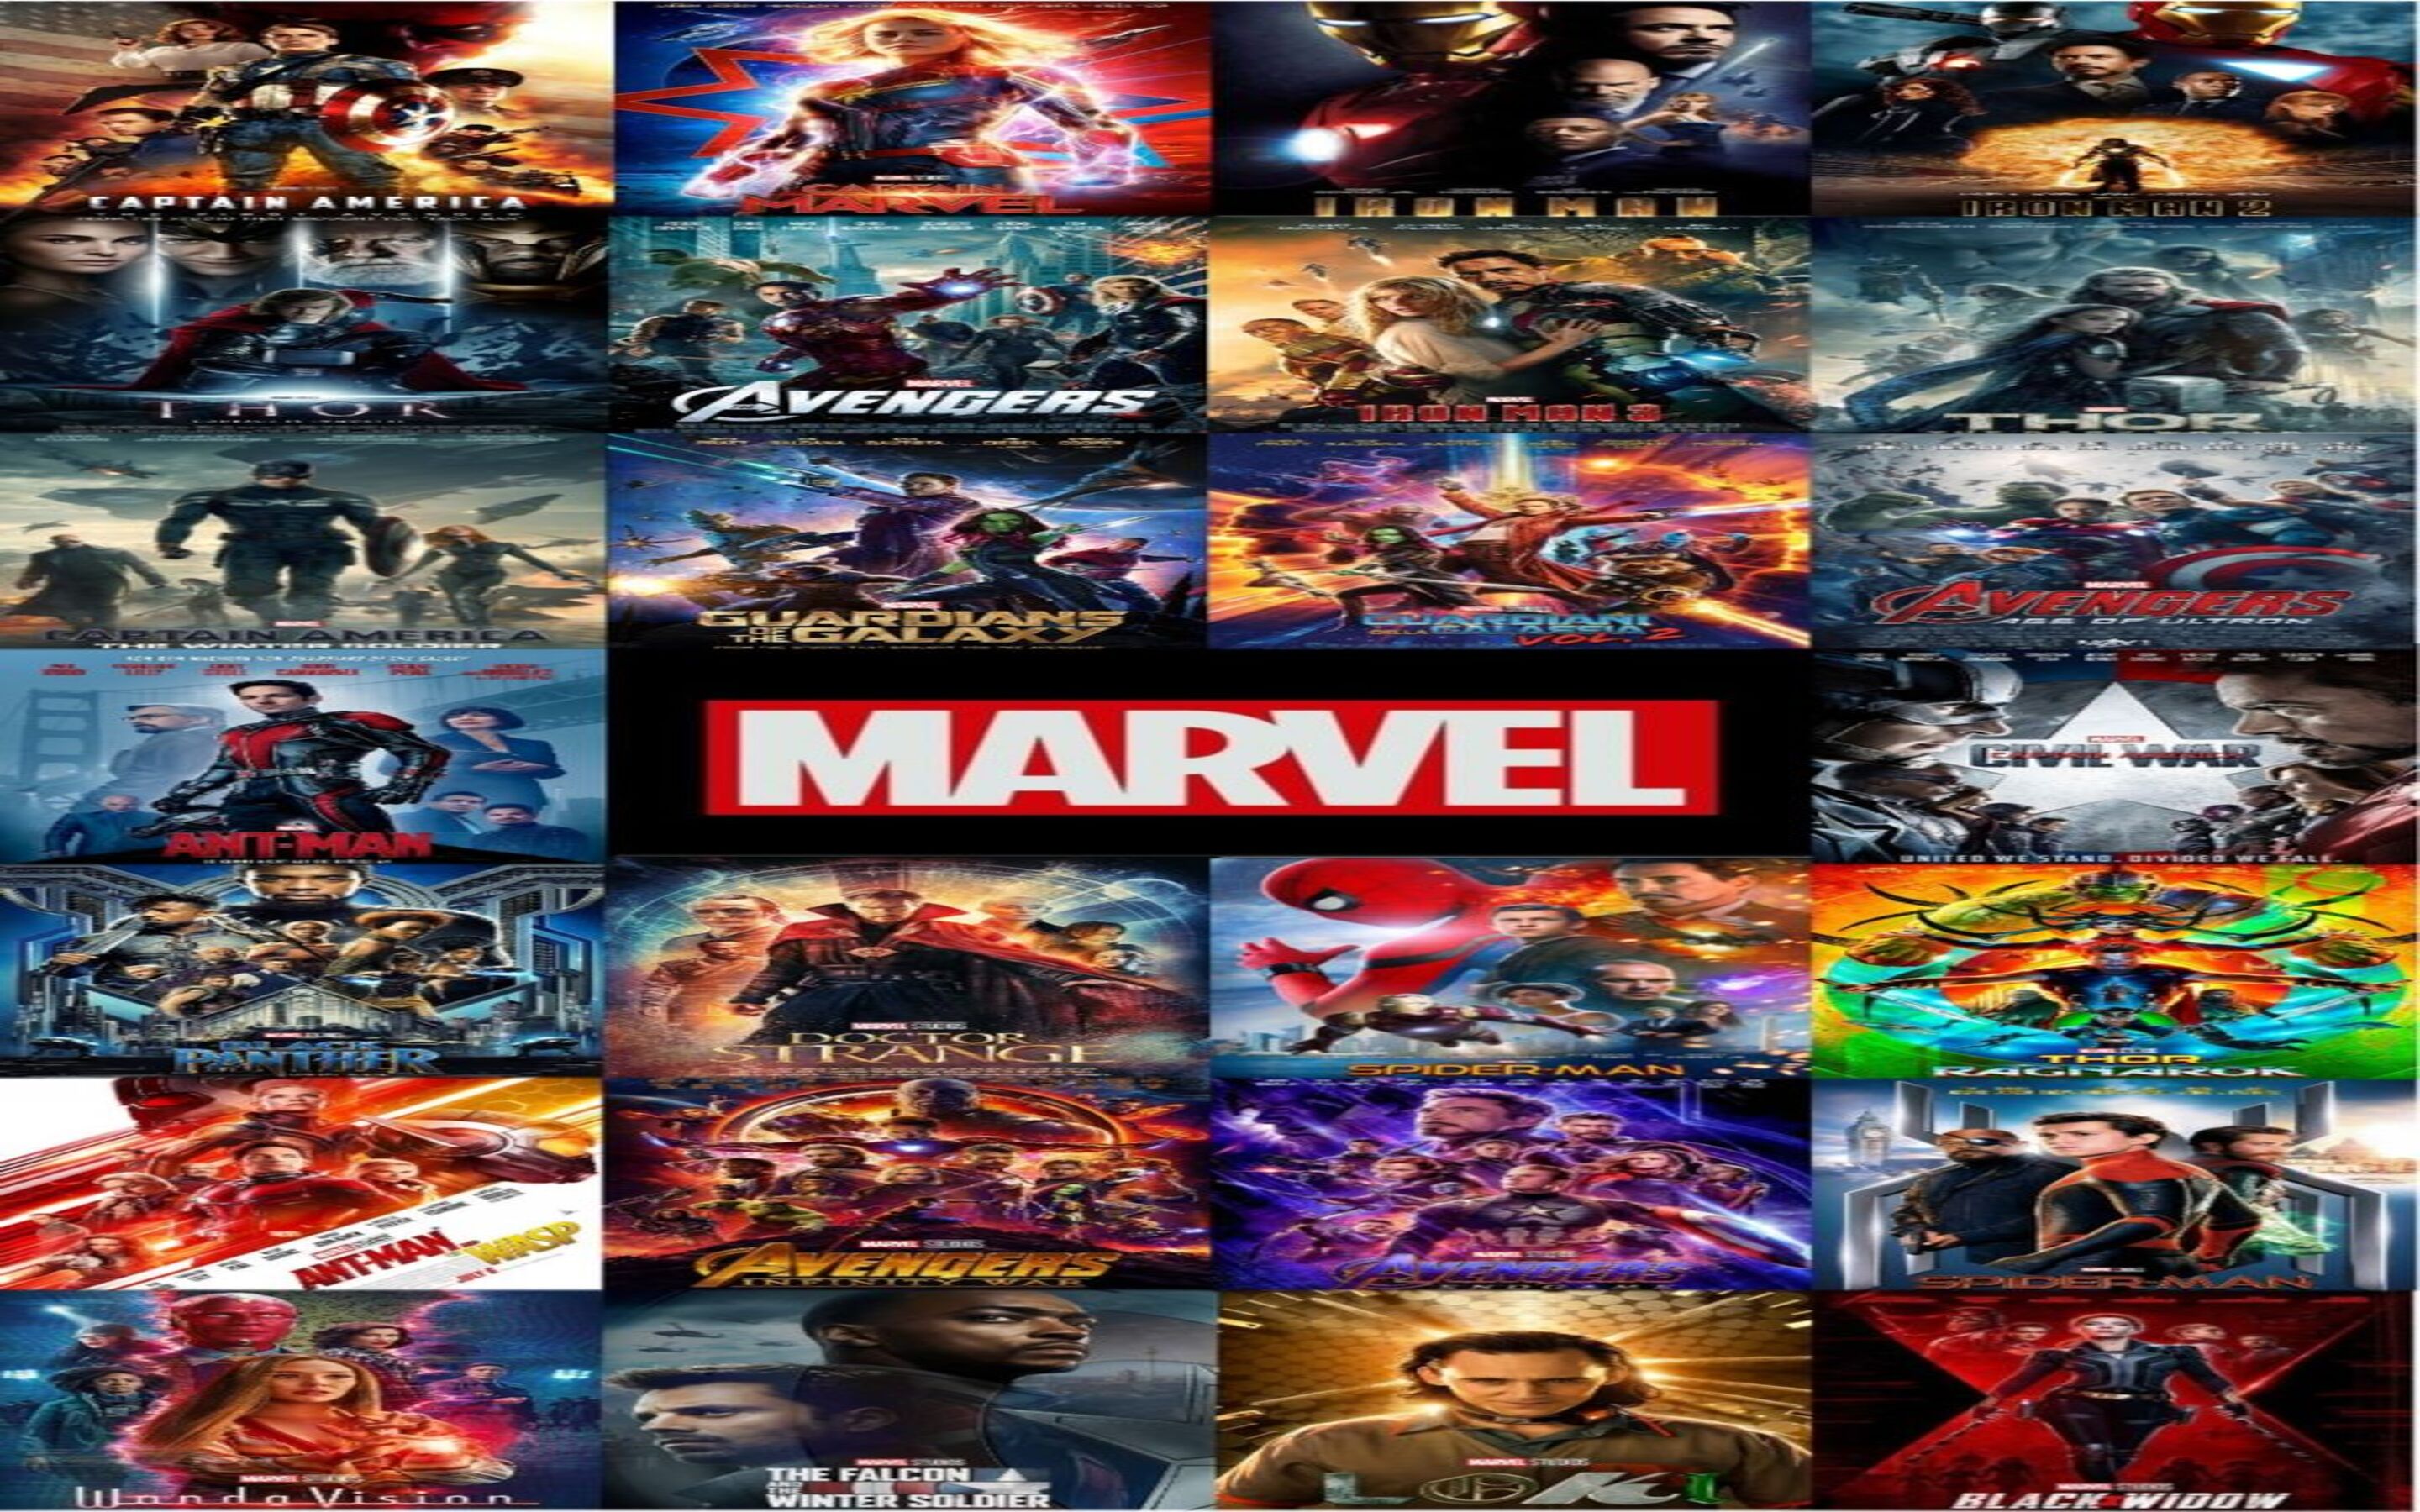 Download New Marvel Characters Free 4K wallpaper of in high definition Mac  Pro Wallpaper 